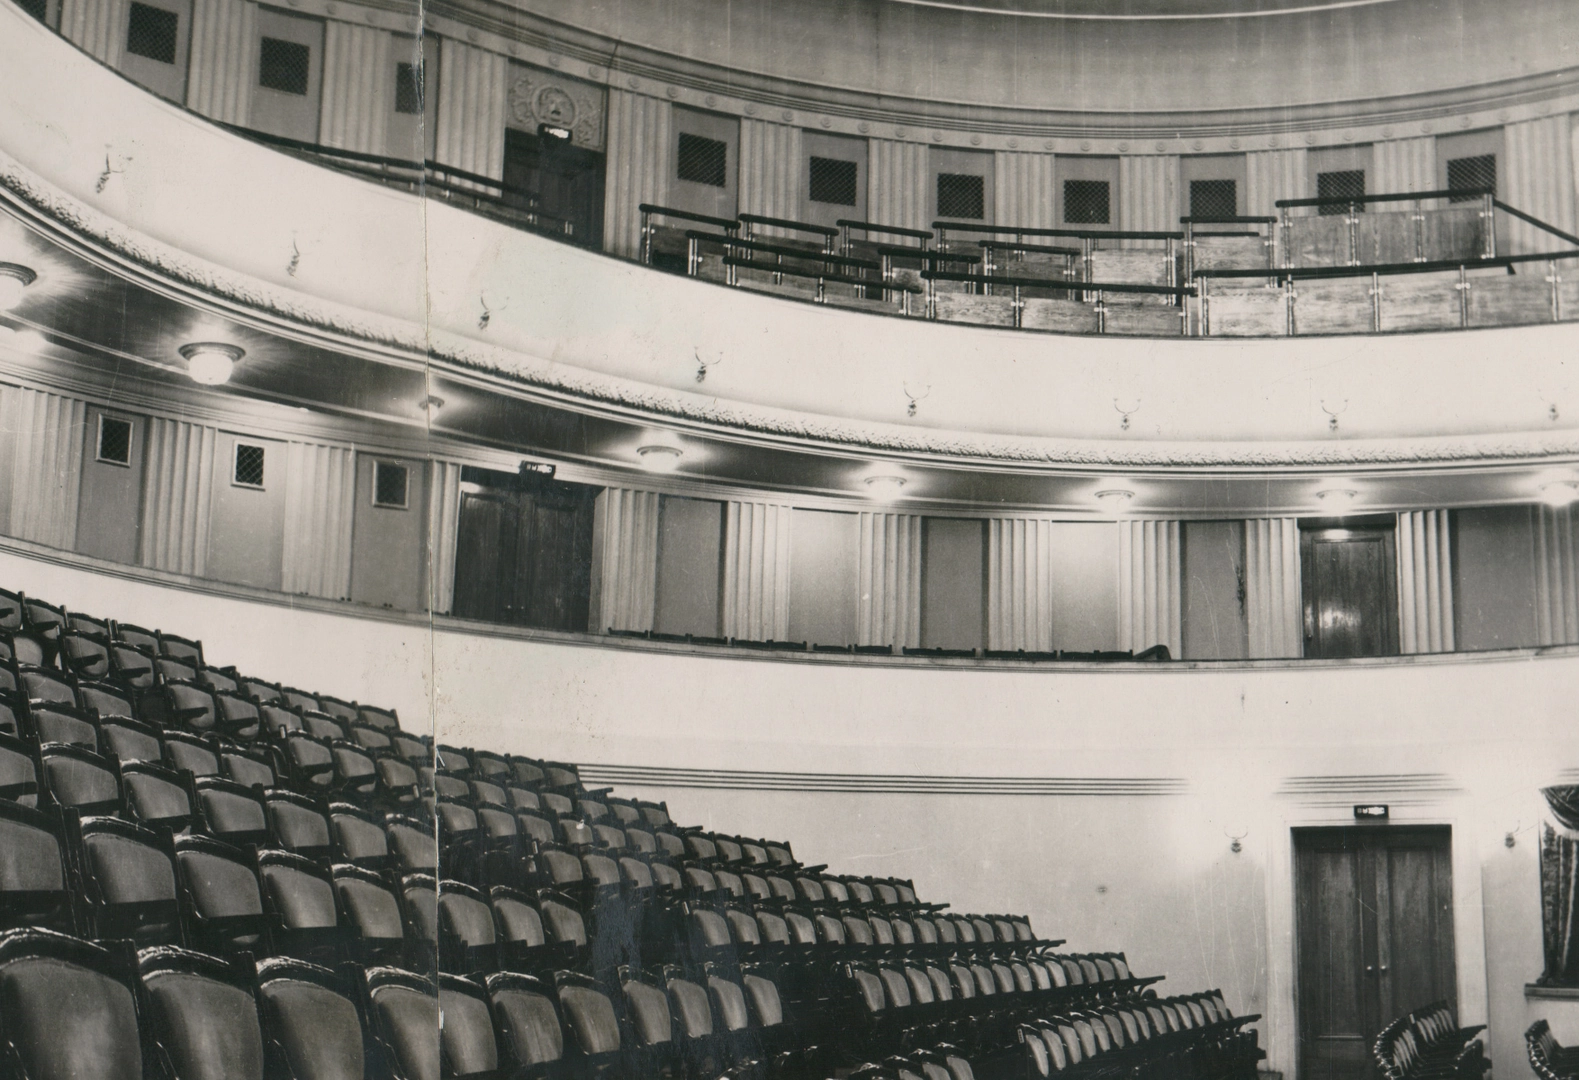 The original auditorium, which has been restored, including chairs from Zabolotny's architectural library.